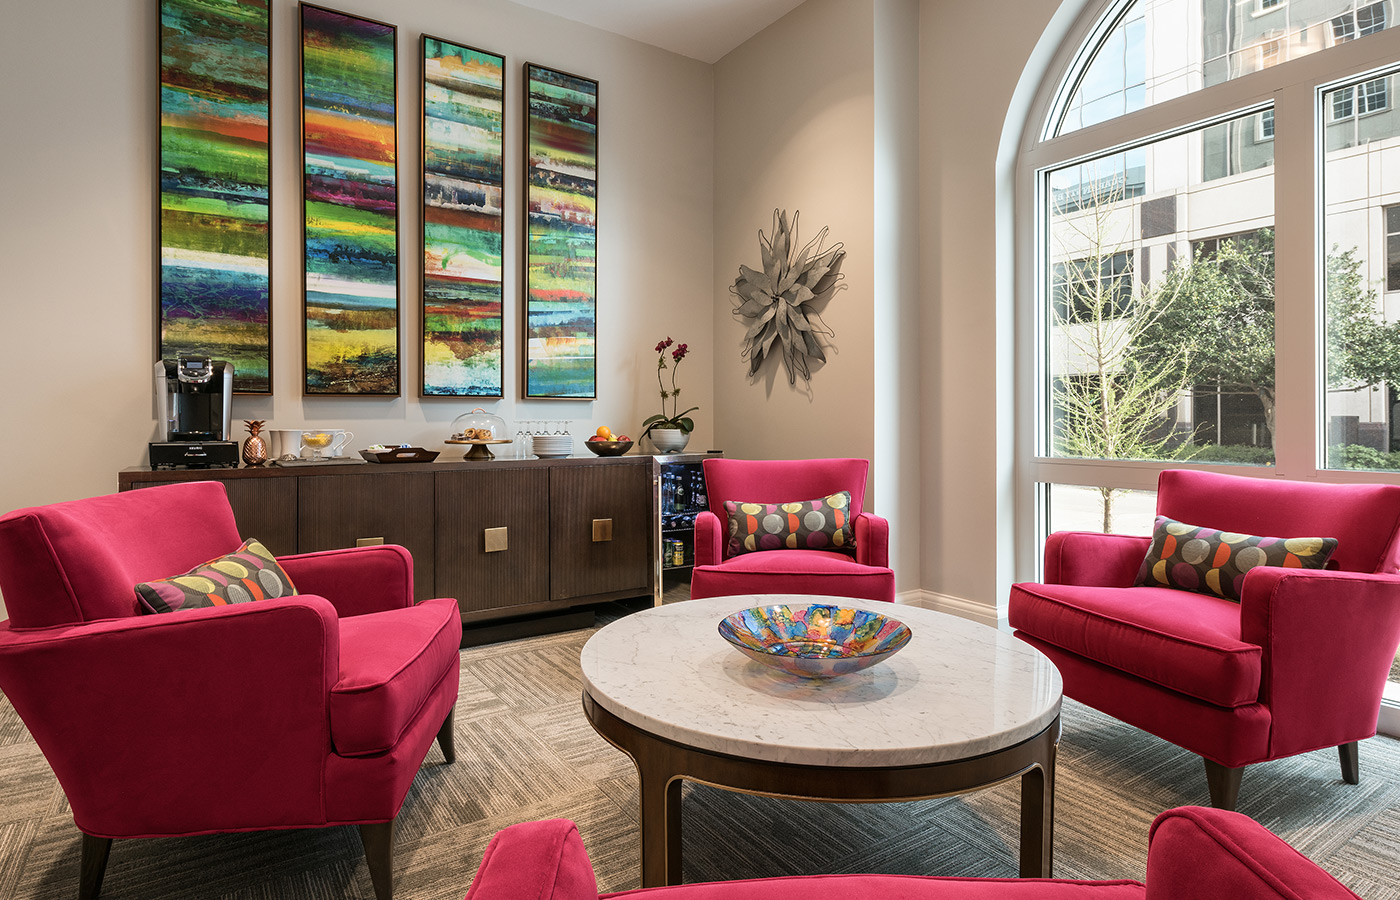 Round coffee table surrounded by four colorful armchairs.  